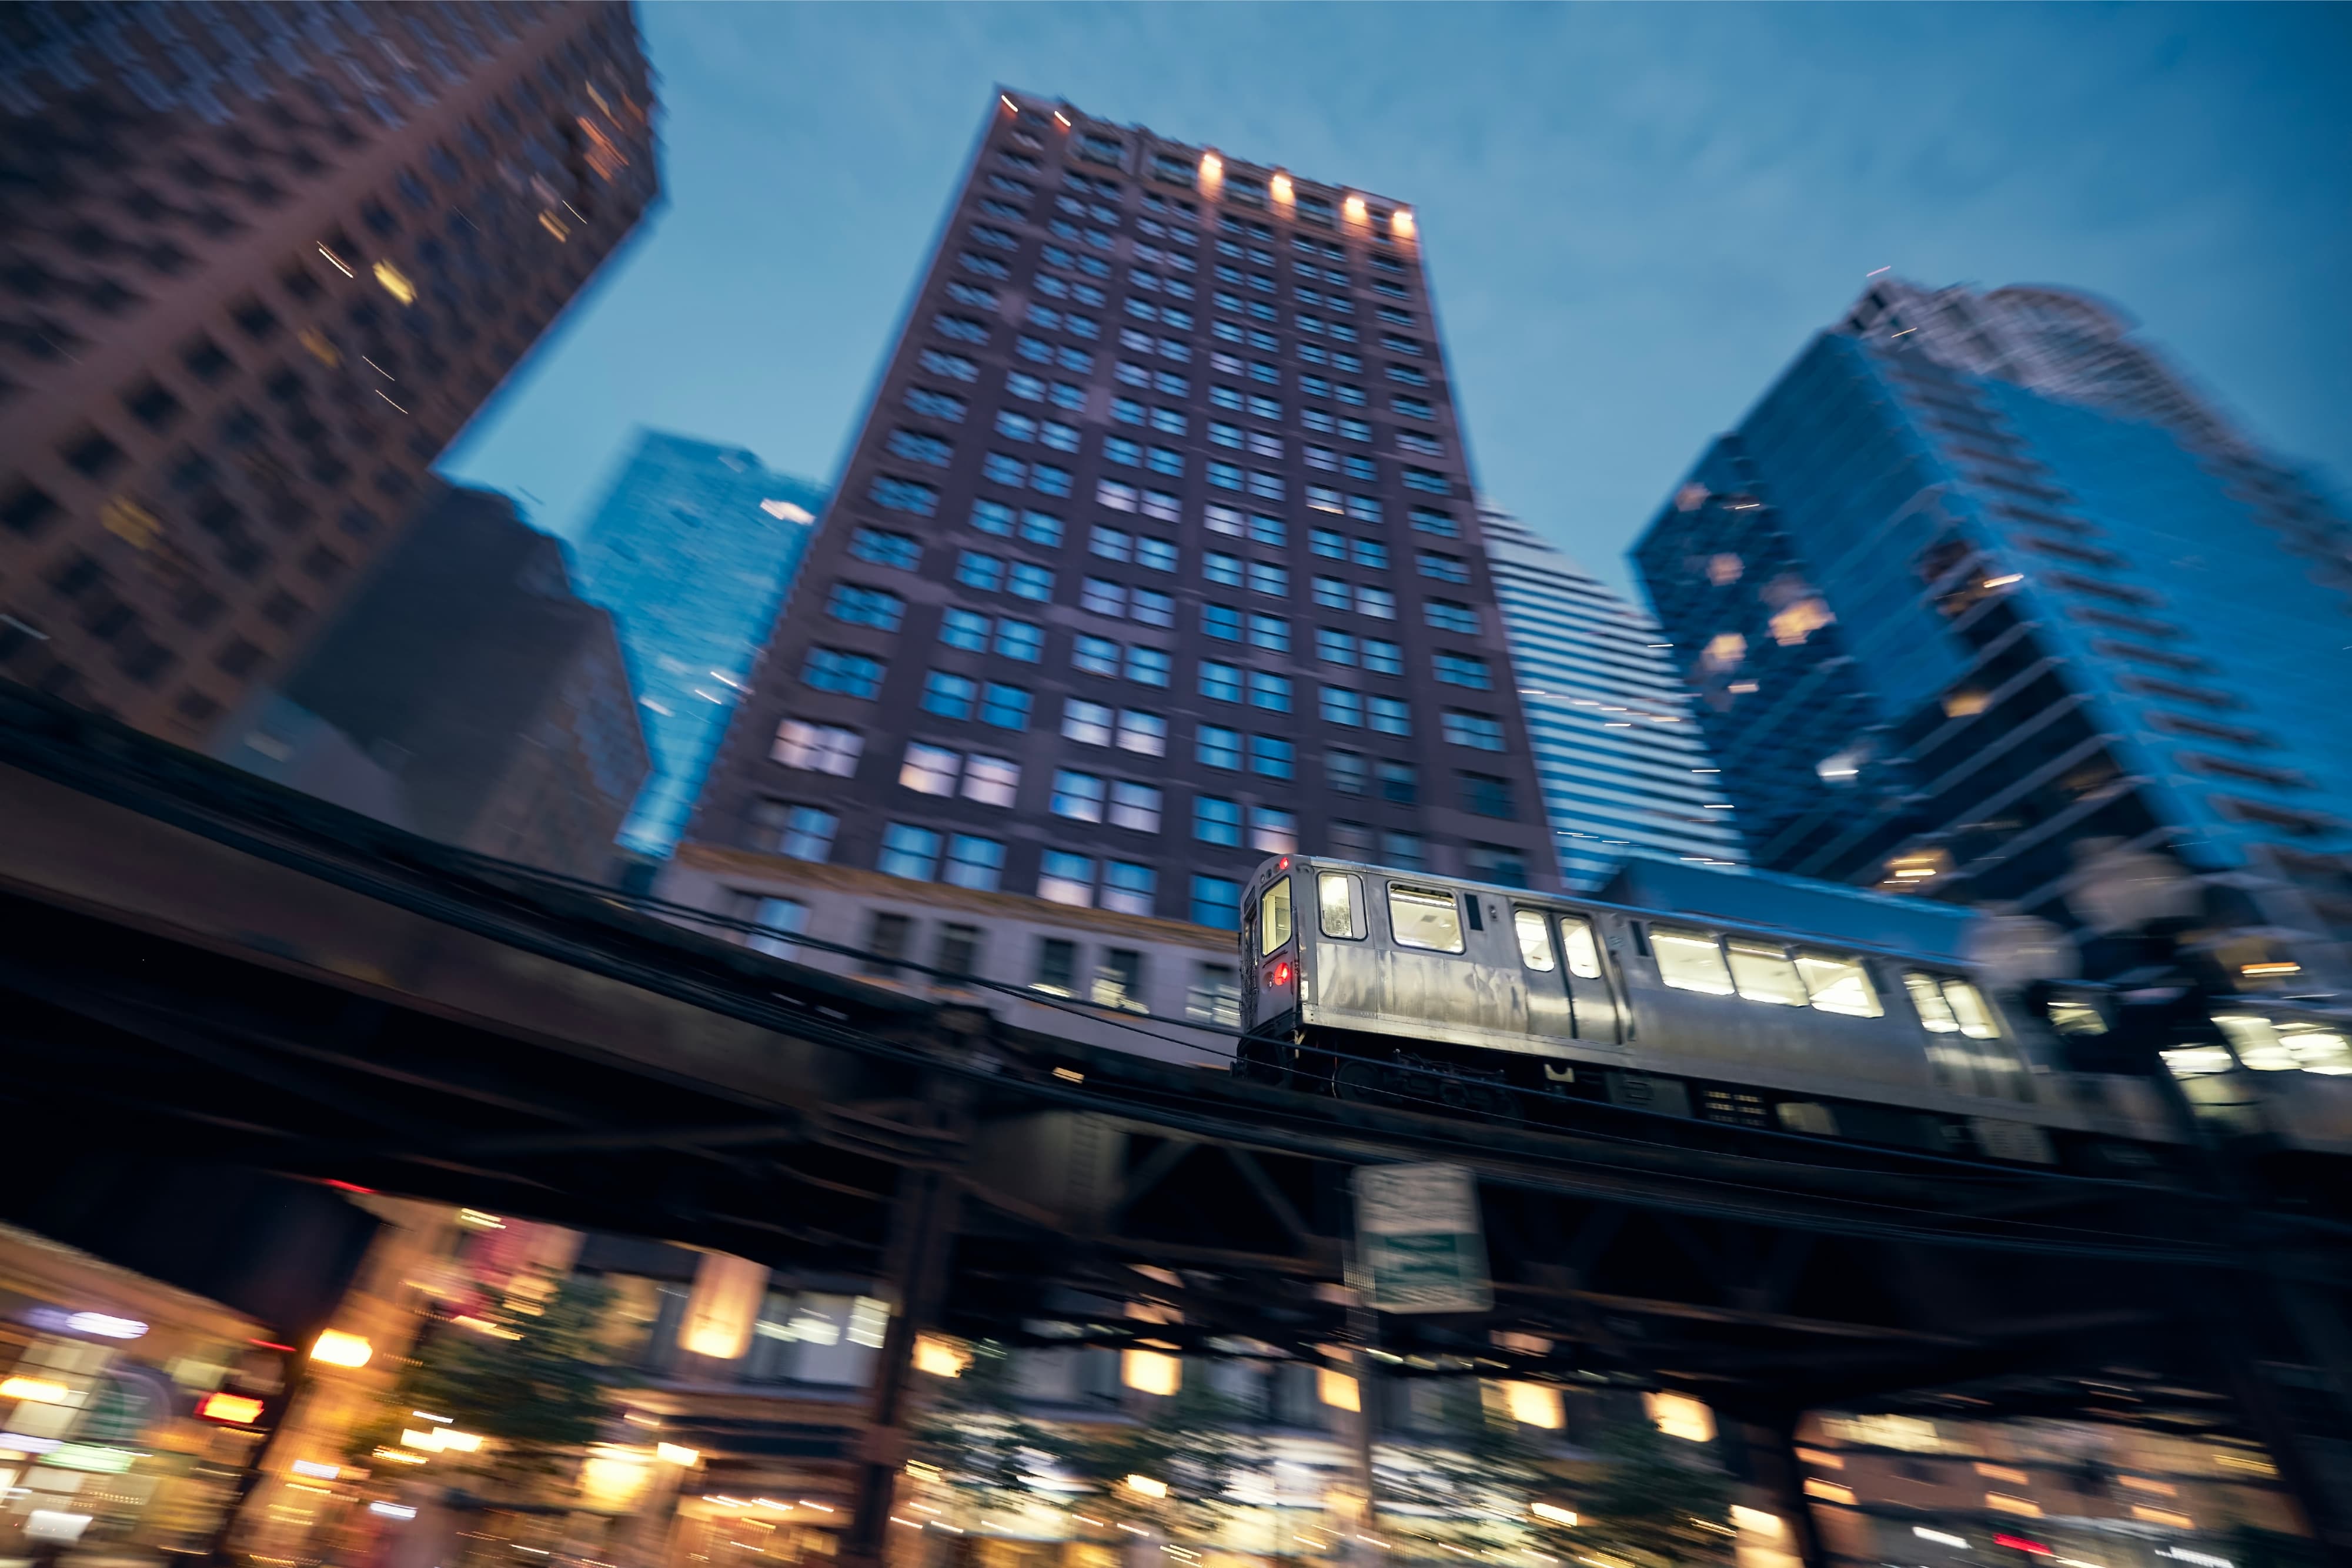 Elevated train in Chicago in blurred motion